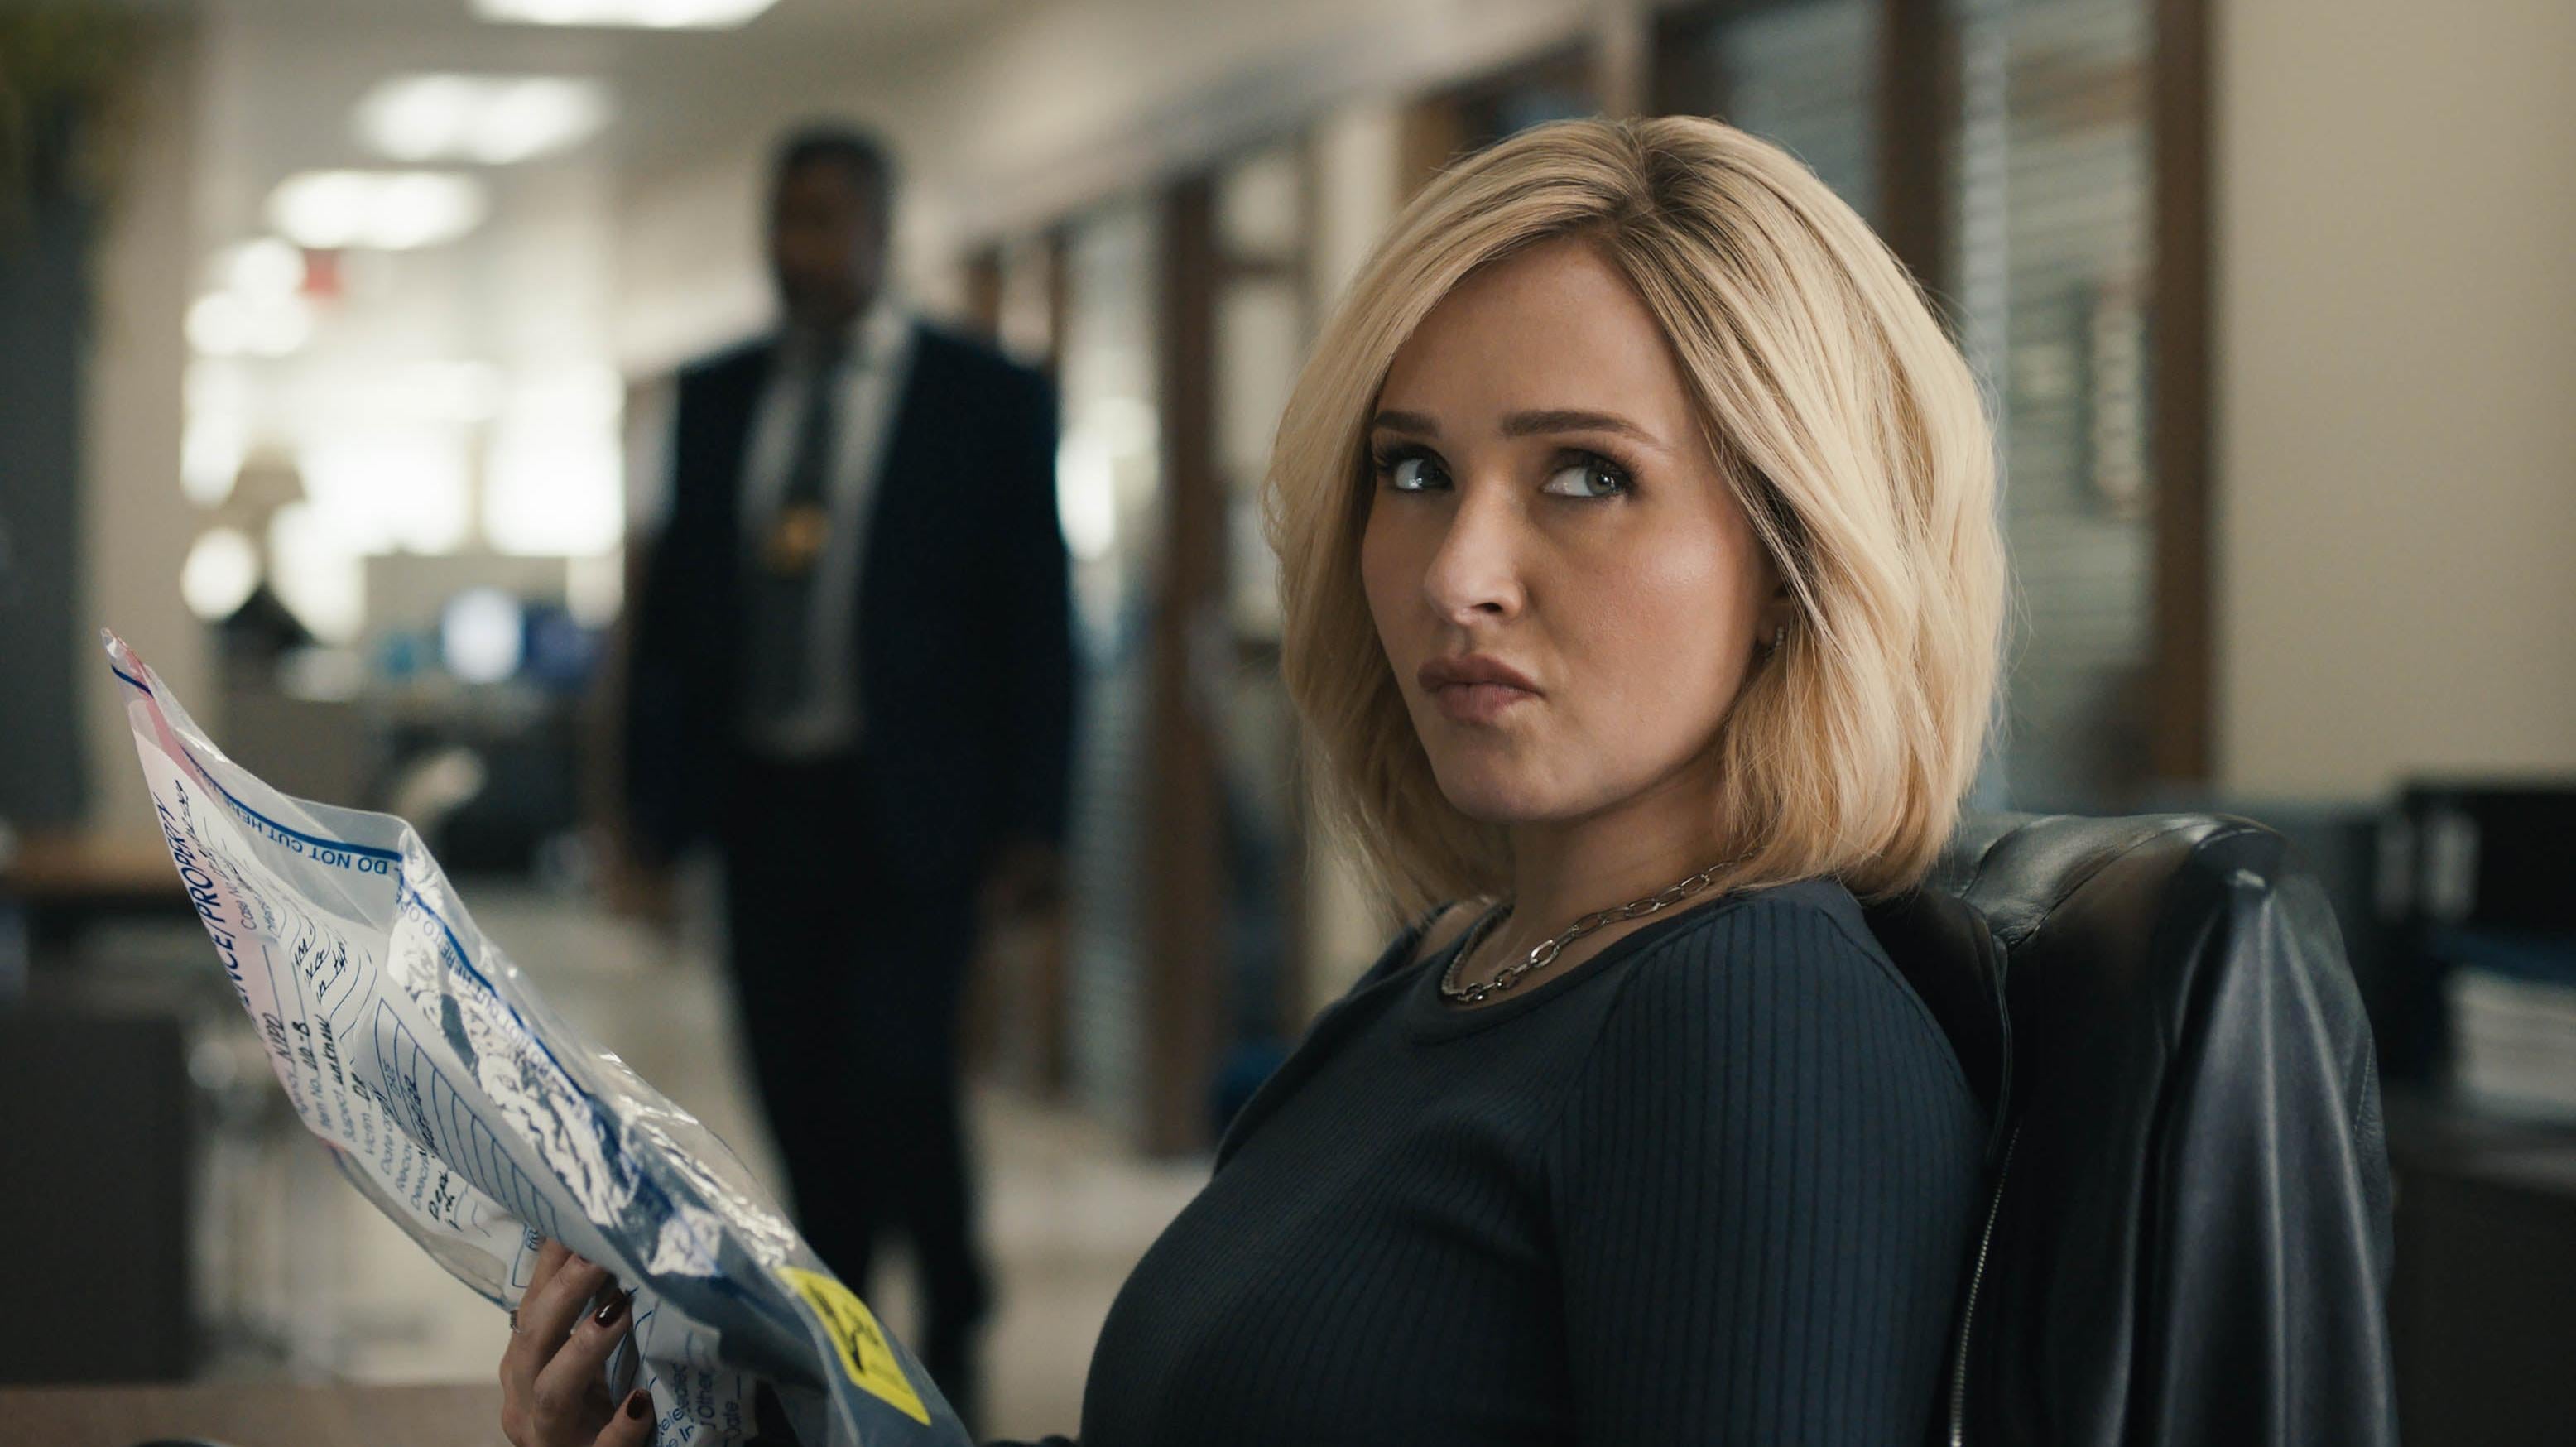 Hayden Panettiere is back as Kirby in Scream VI. (Image: Paramount)